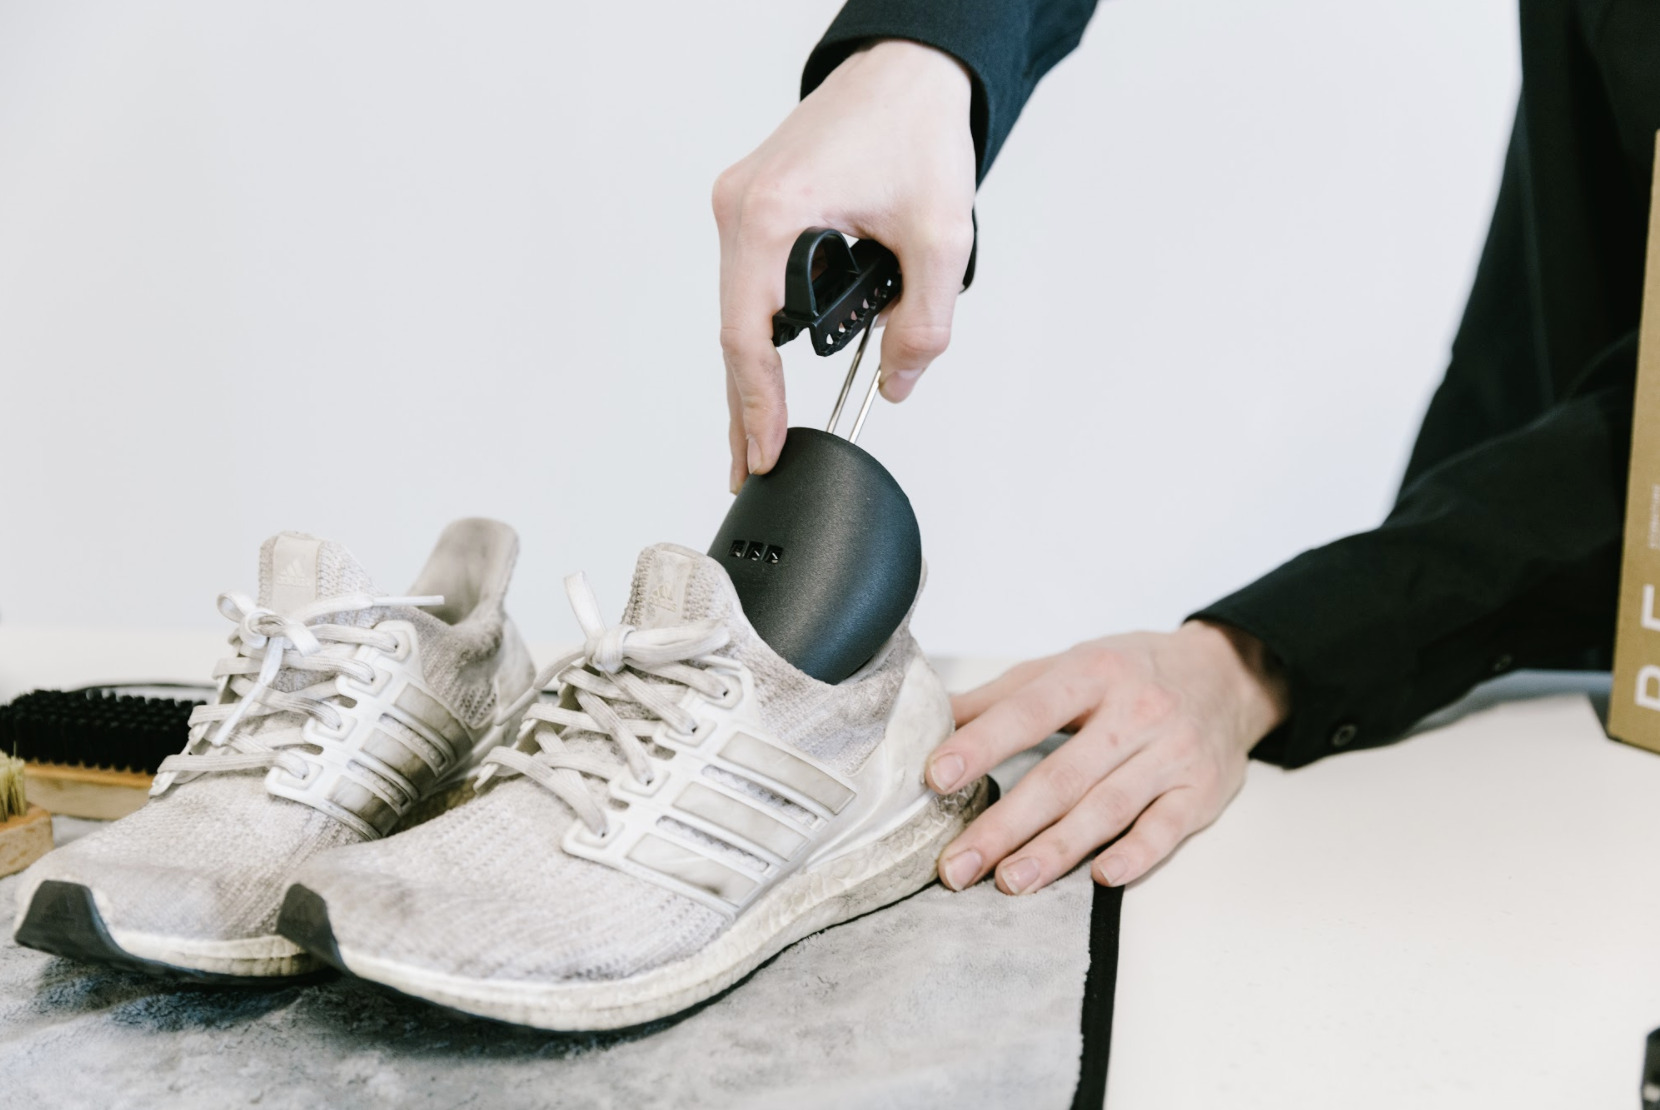 How To Wash Adidas Running Shoes